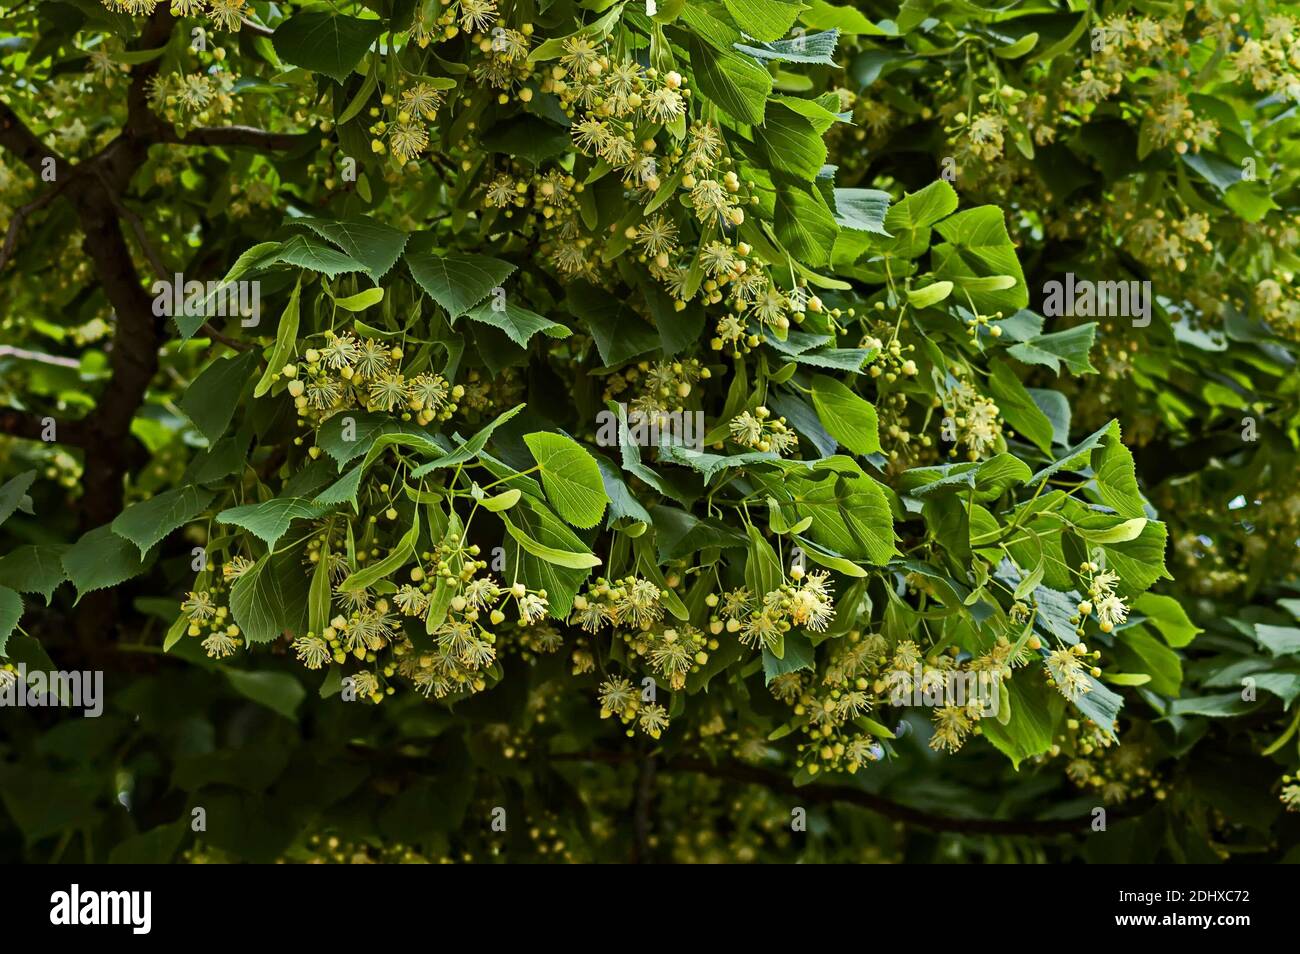 Yellow flowers and  green leaves of Tilia, linden or lime tree in summer, Sofia, Bulgaria Stock Photo